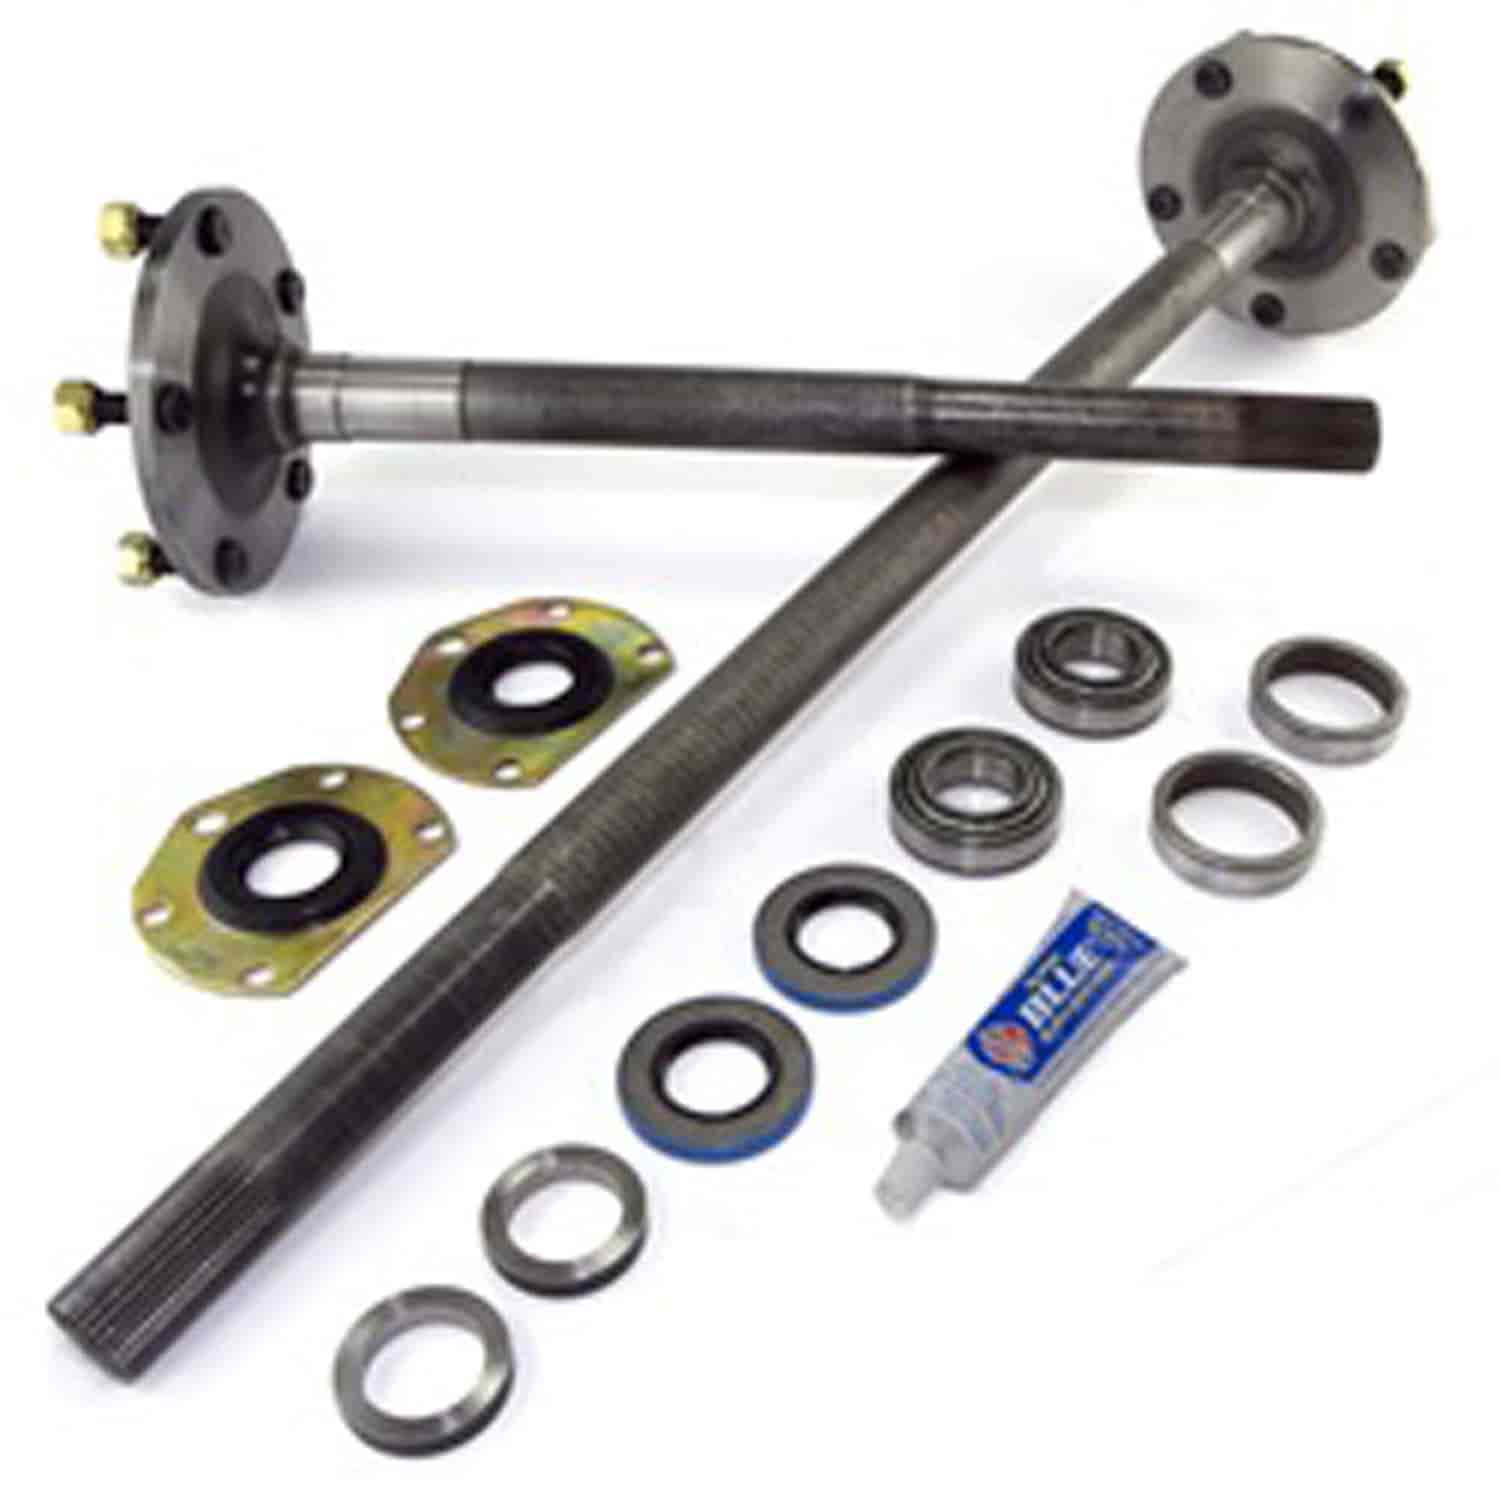 One Piece Axle Conversion Kit AMC20 Quadratrac Includes Axles Bearings Retainers Spacers Inner and O